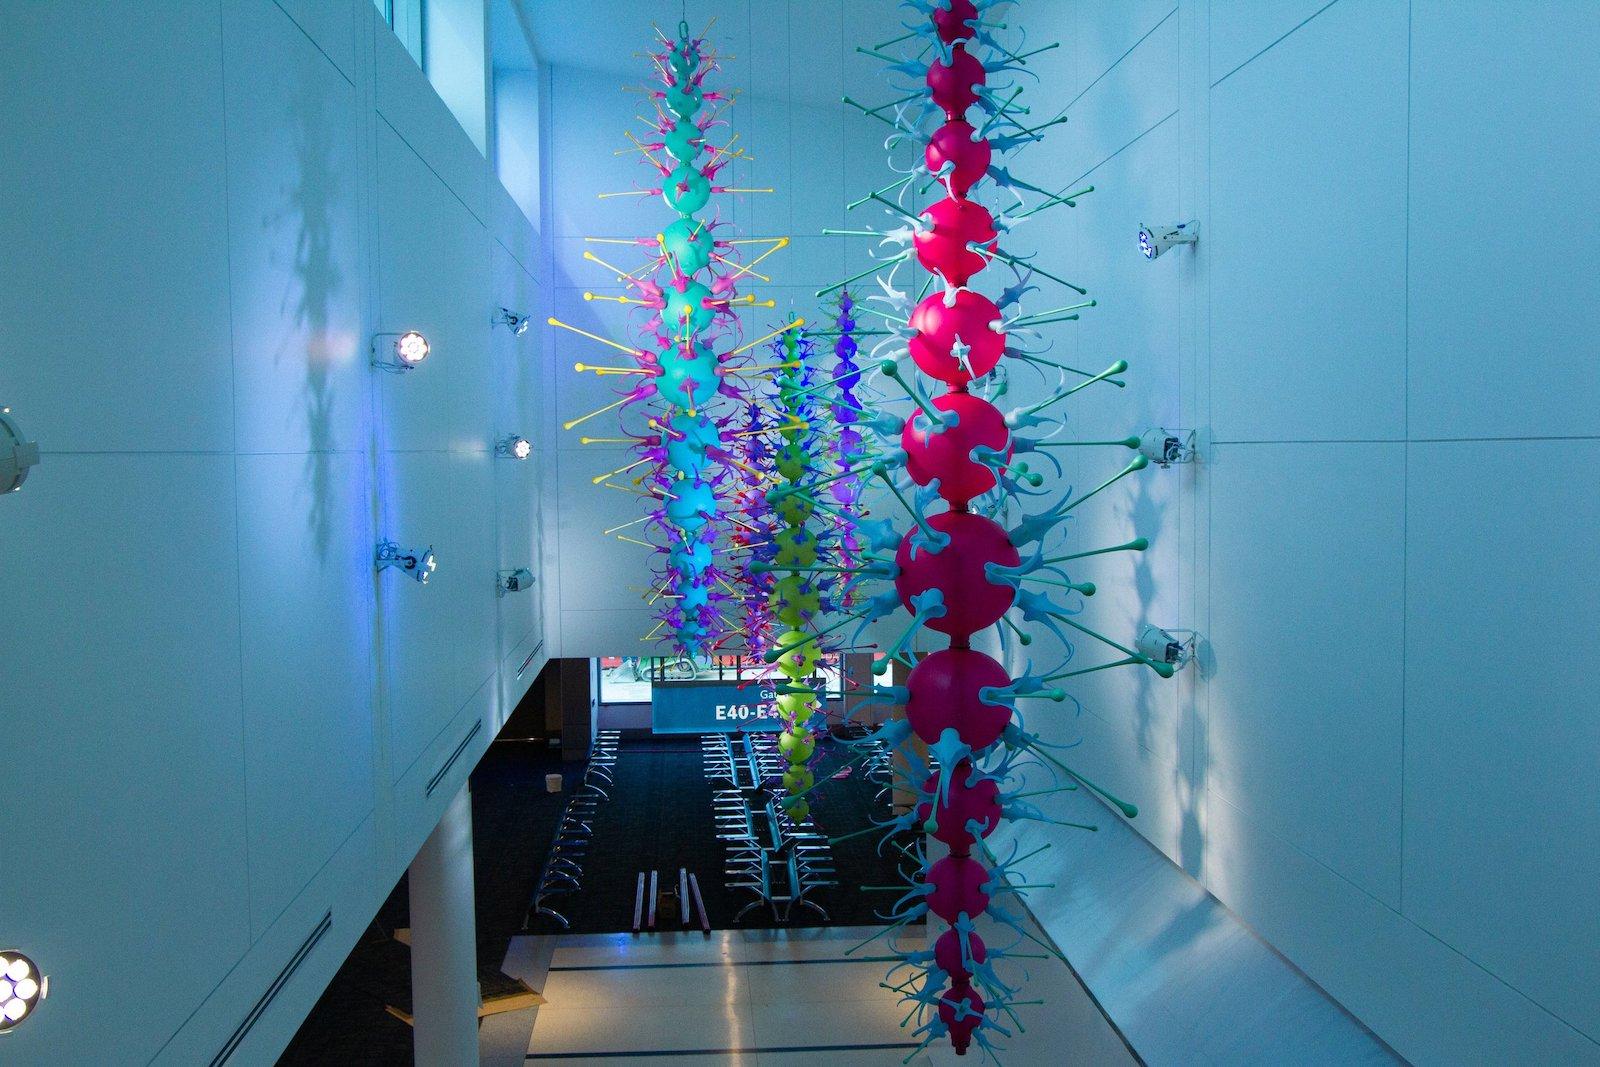 Davis's colored luminaries at work in an installation view of the West clerestory.